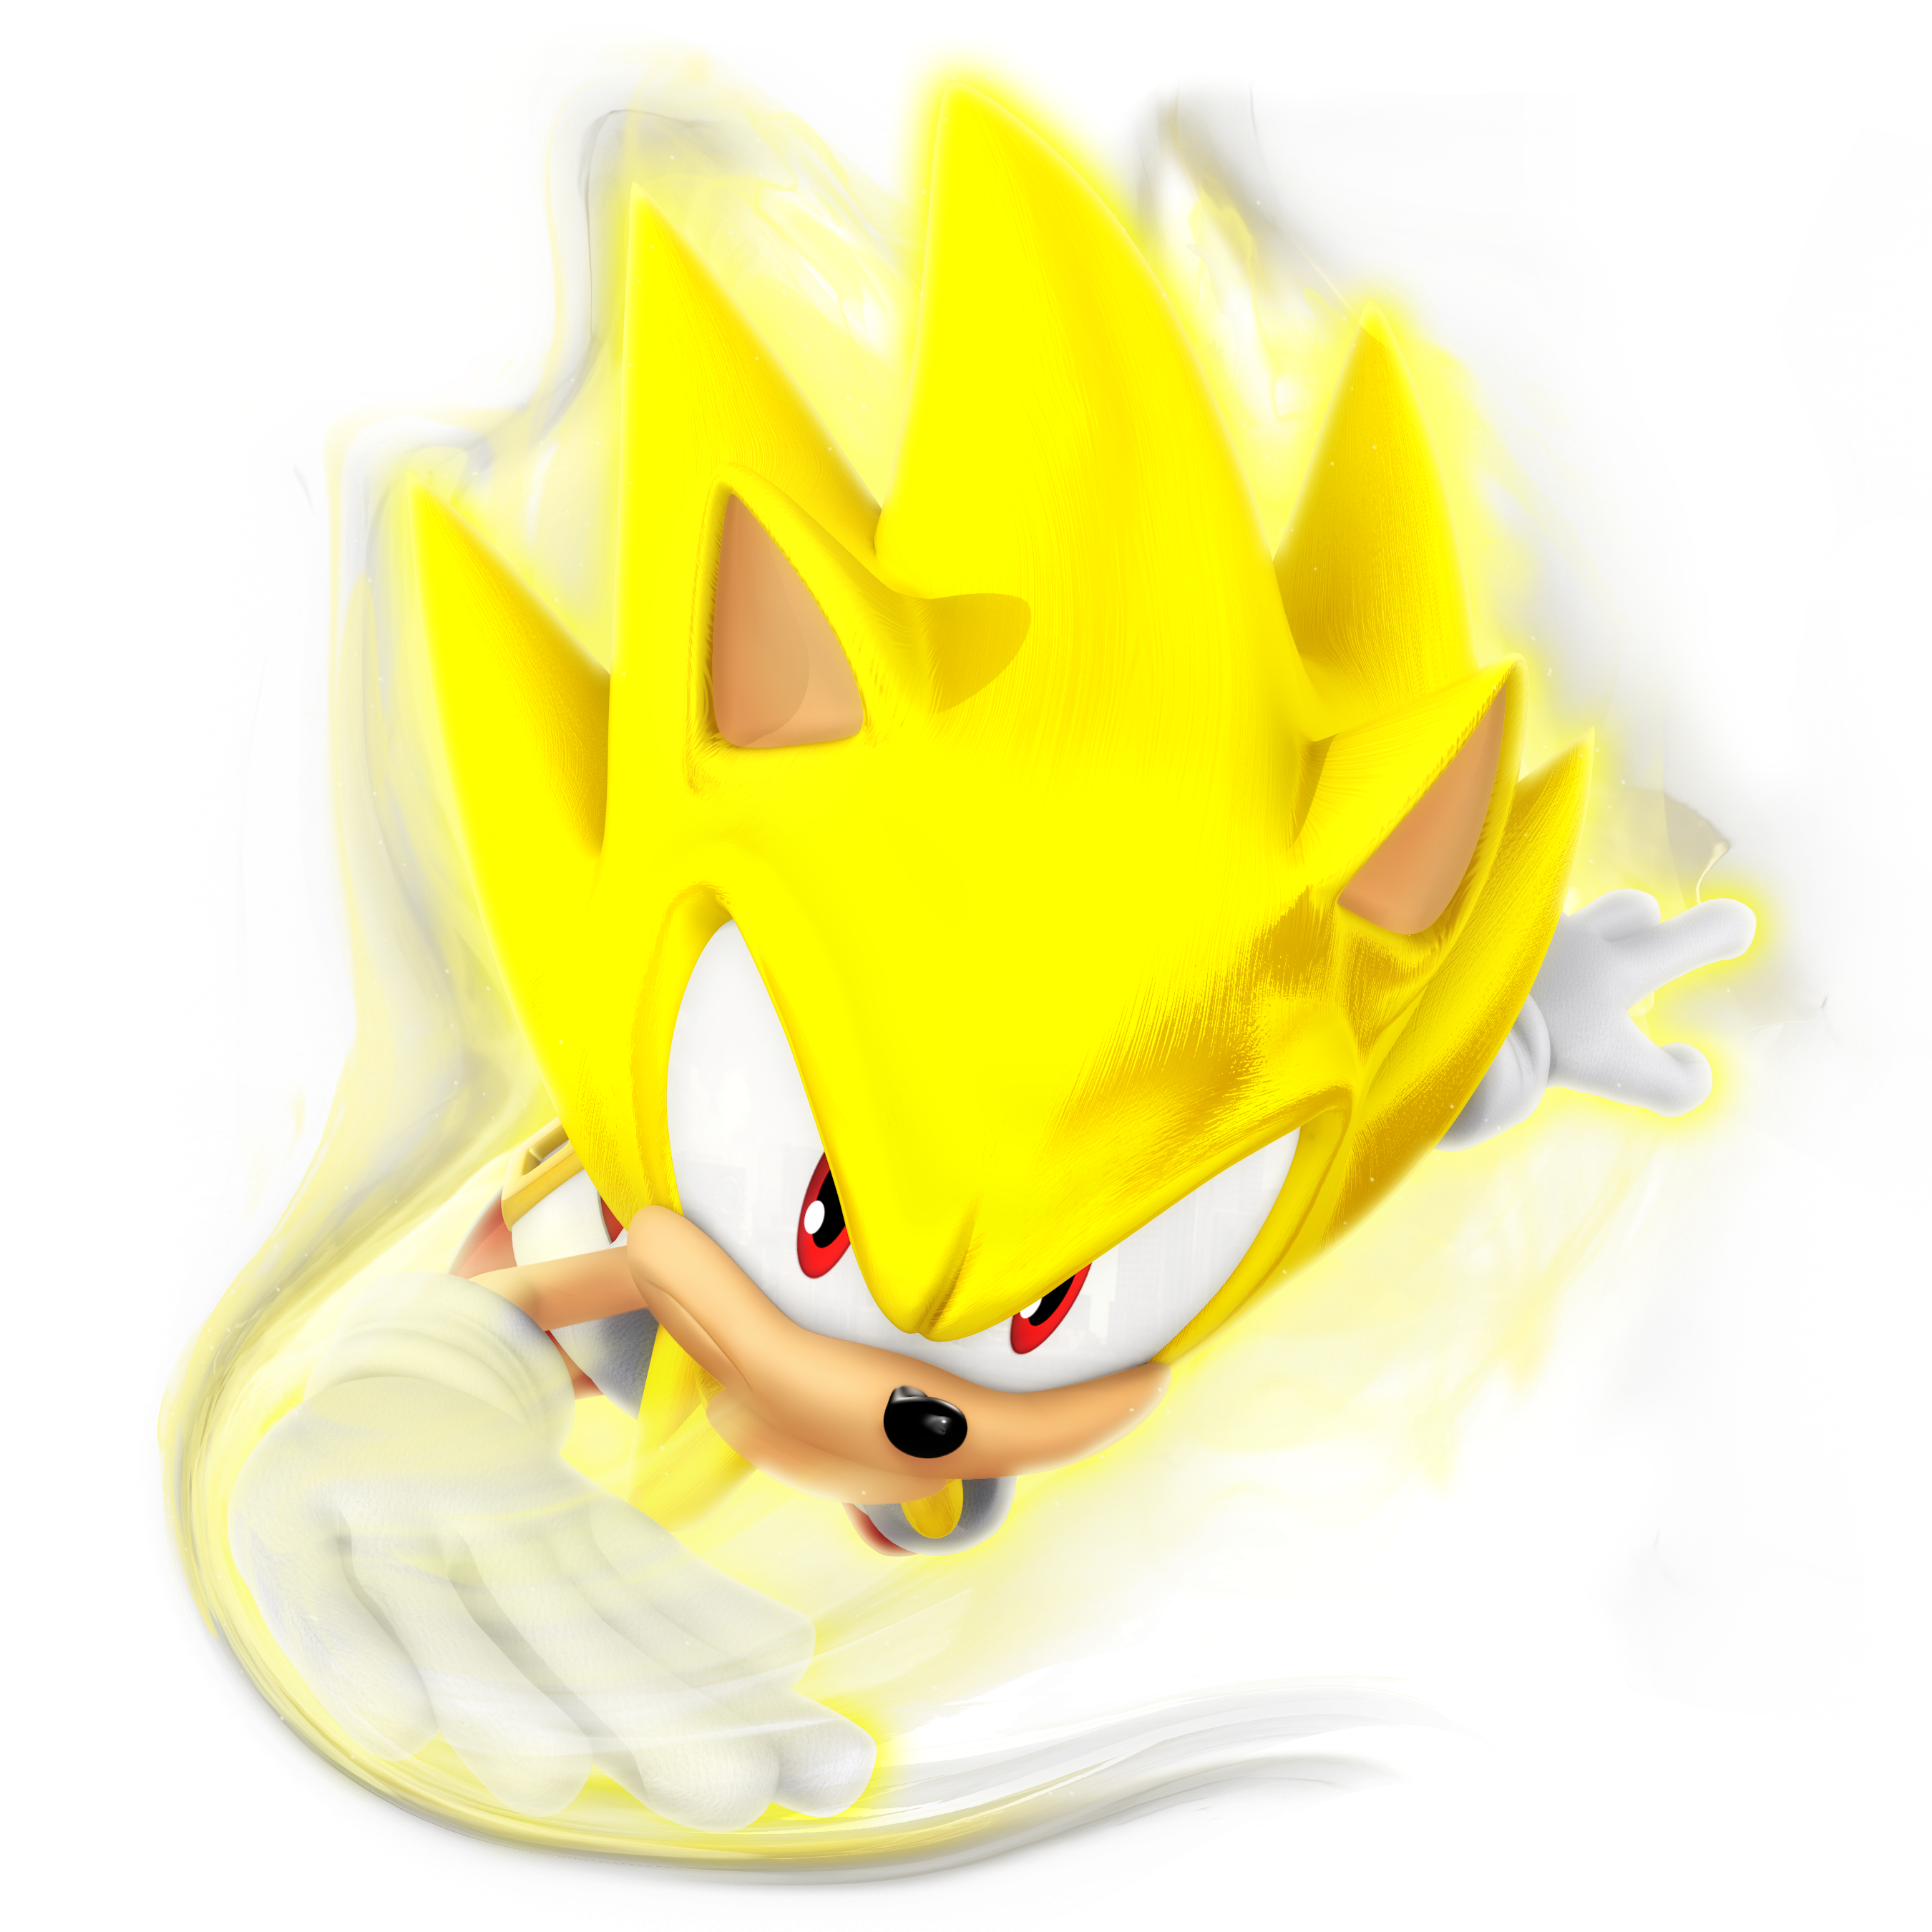 Nibroc.Rock on X: Huh maybe I'm just seeing things and its a  coincidence However a modern super tails doesn't really exist so   / X